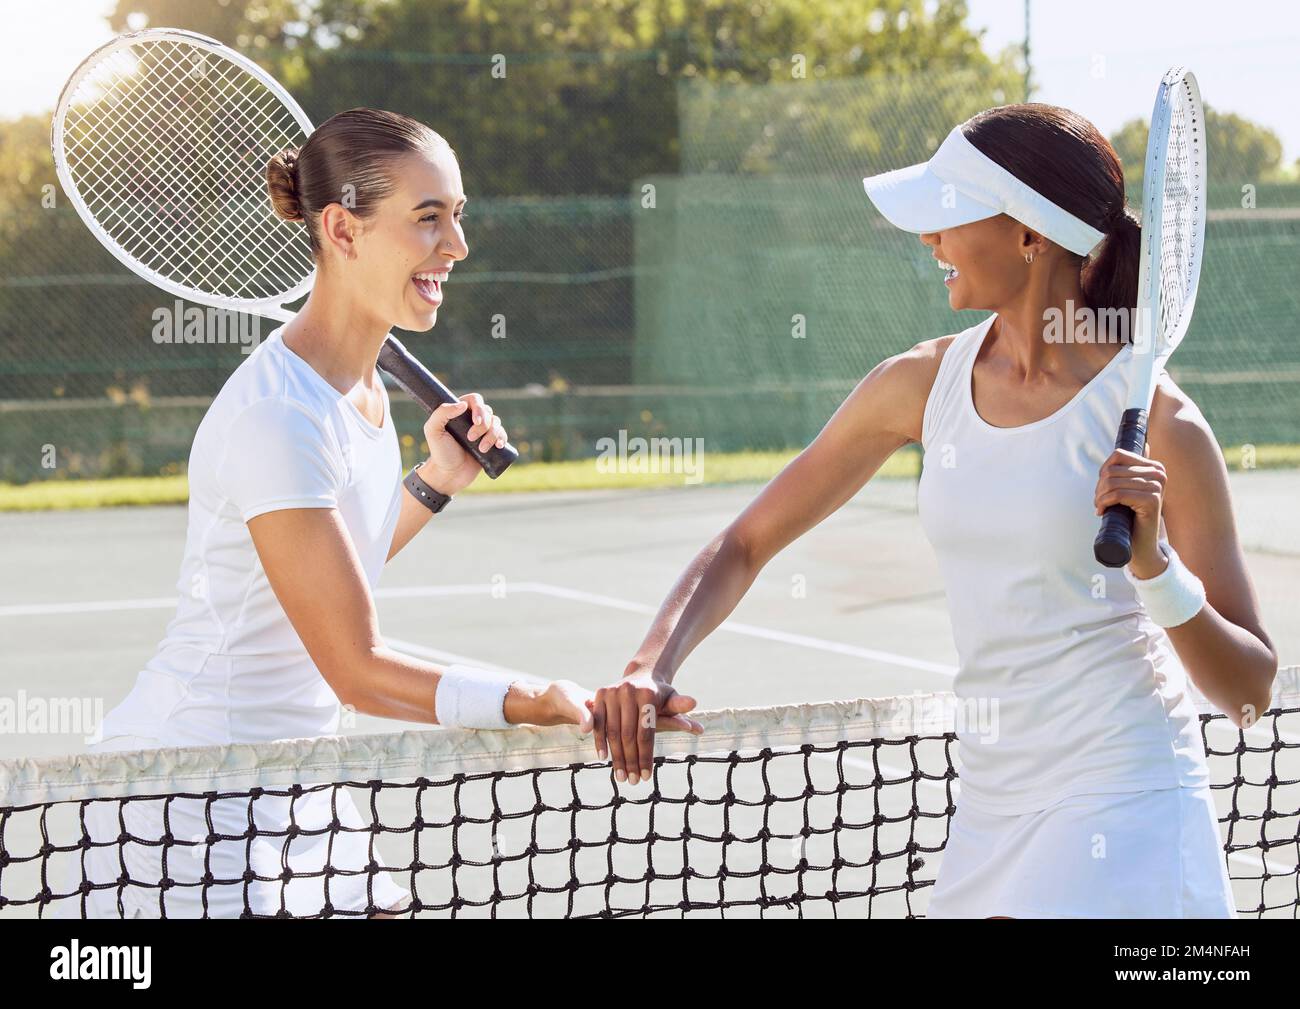 Tennis, friends and match in sports fitness and training for friendly game at the outdoor court. Happy women in sport competition holding rackets for Stock Photo